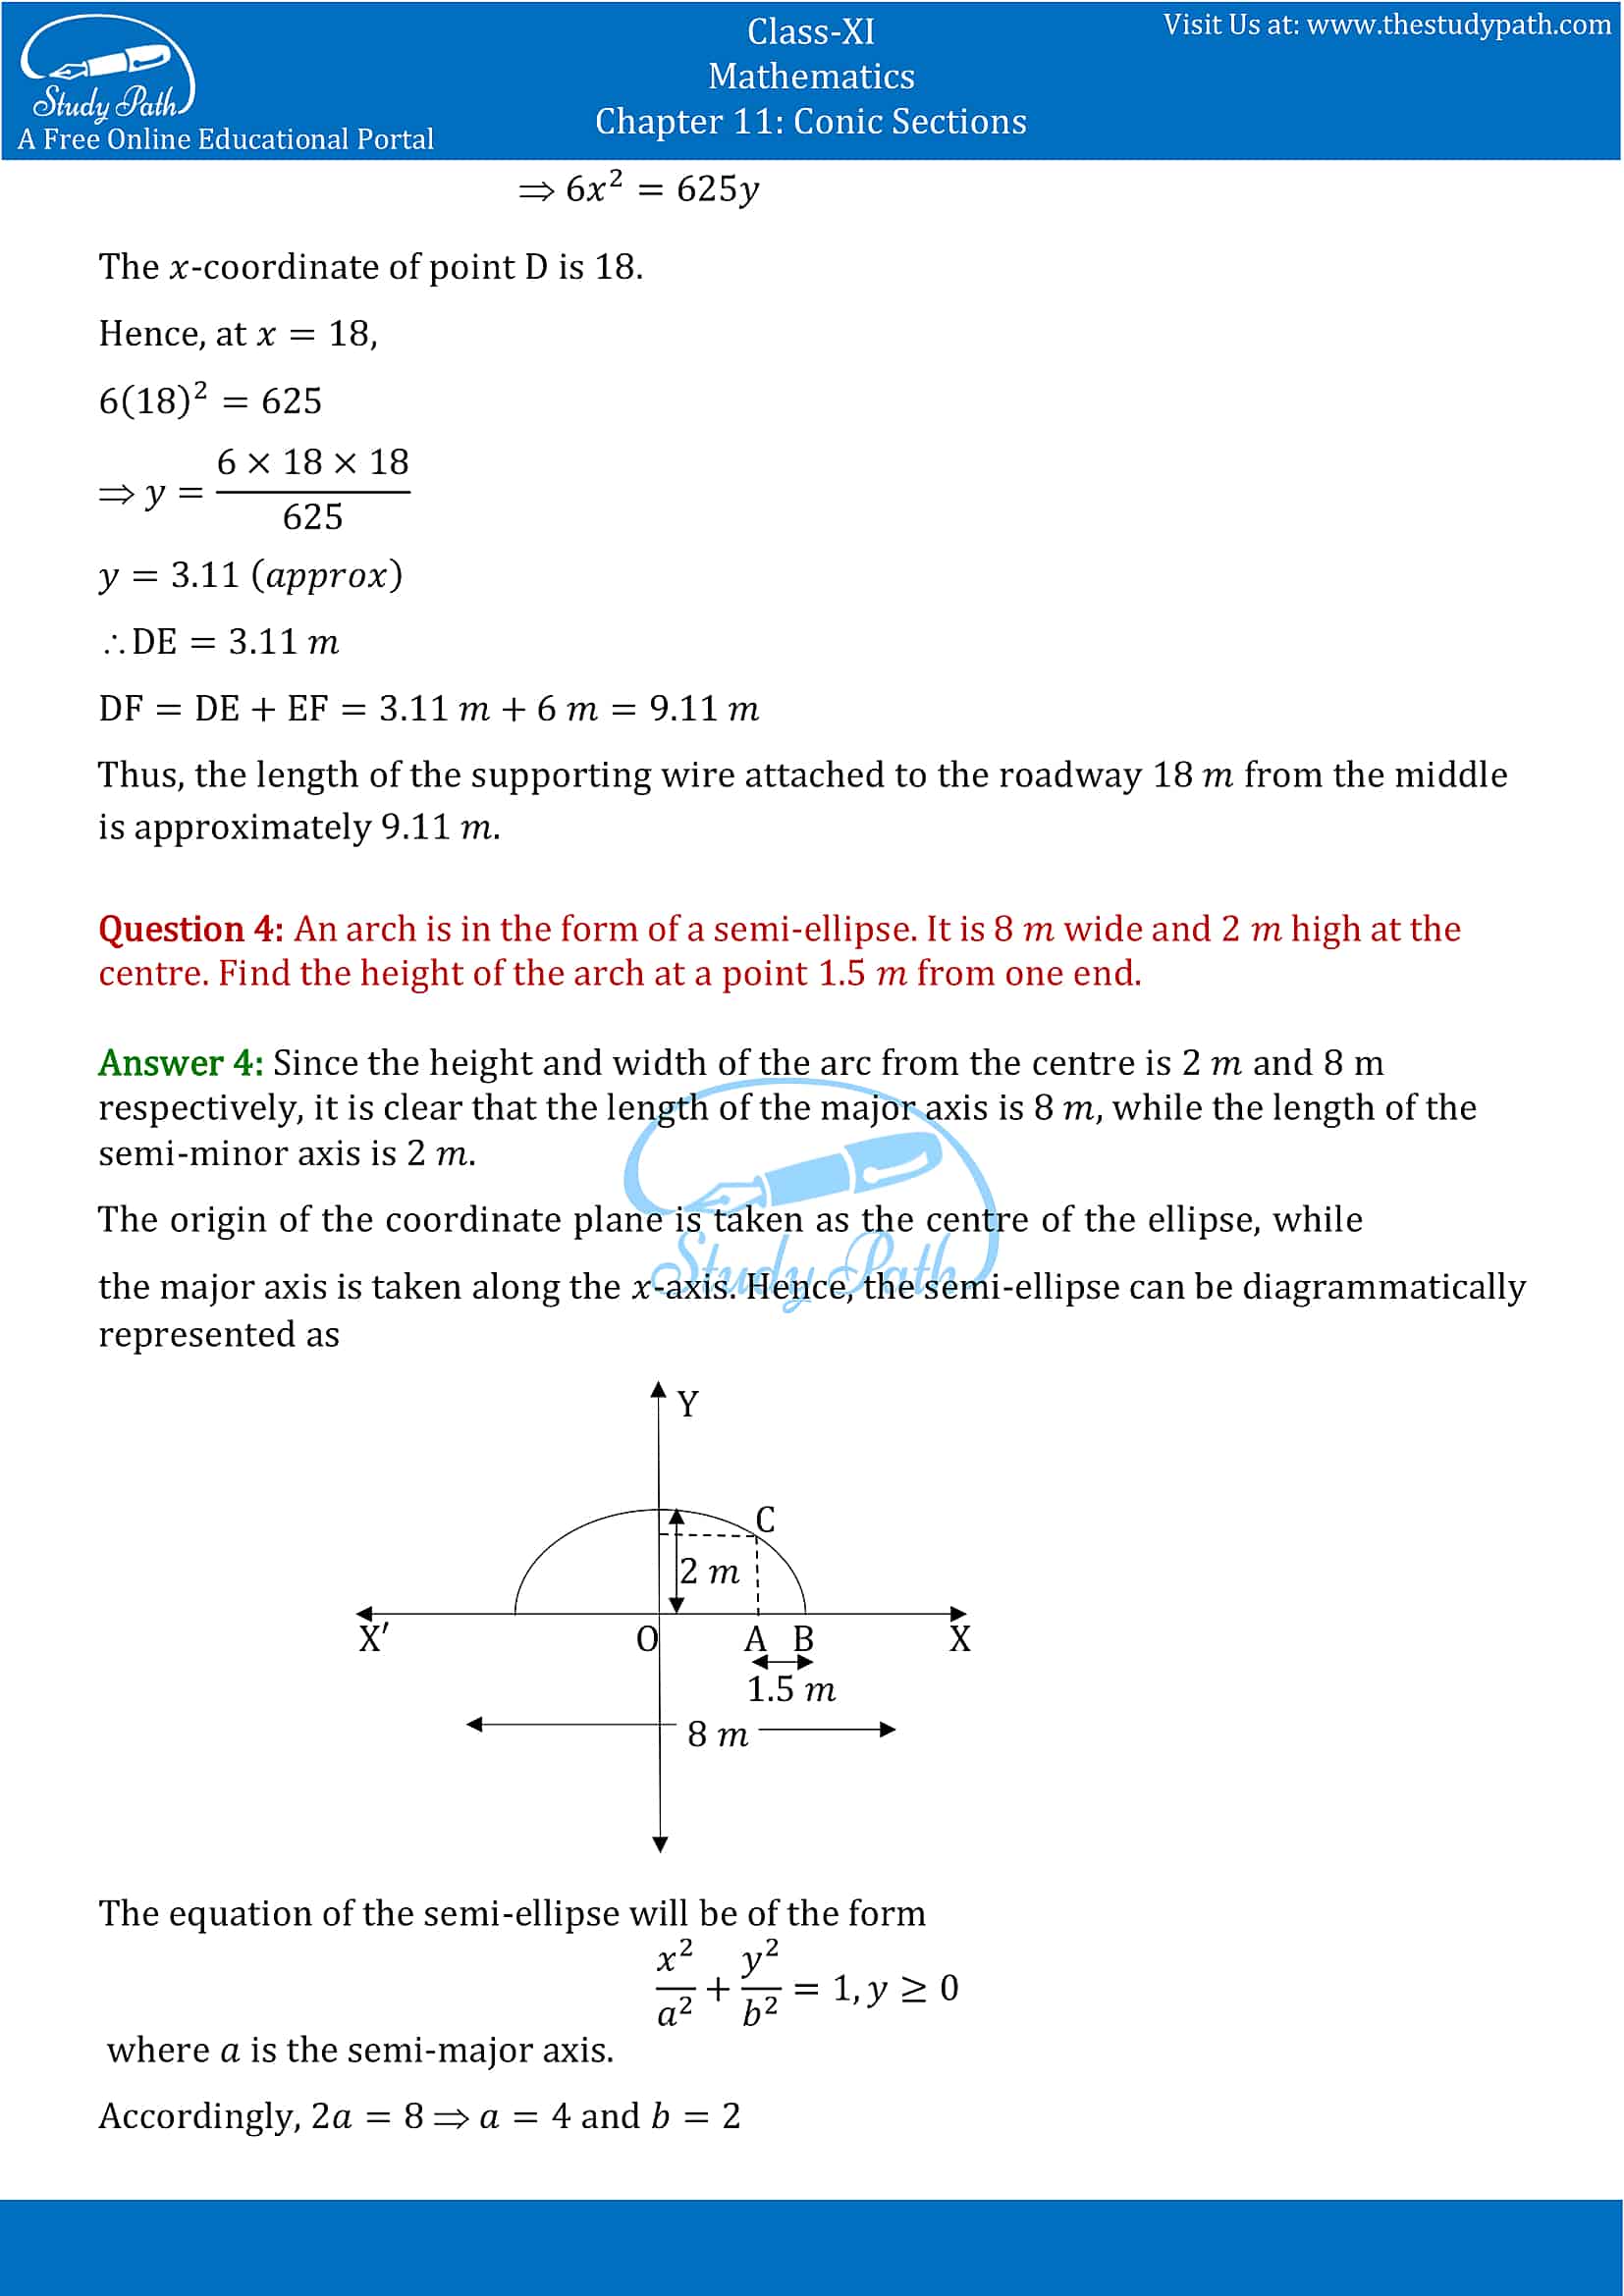 NCERT Solutions for Class 11 Maths chapter 11 Conic Section Miscellaneous Exercise Part-4